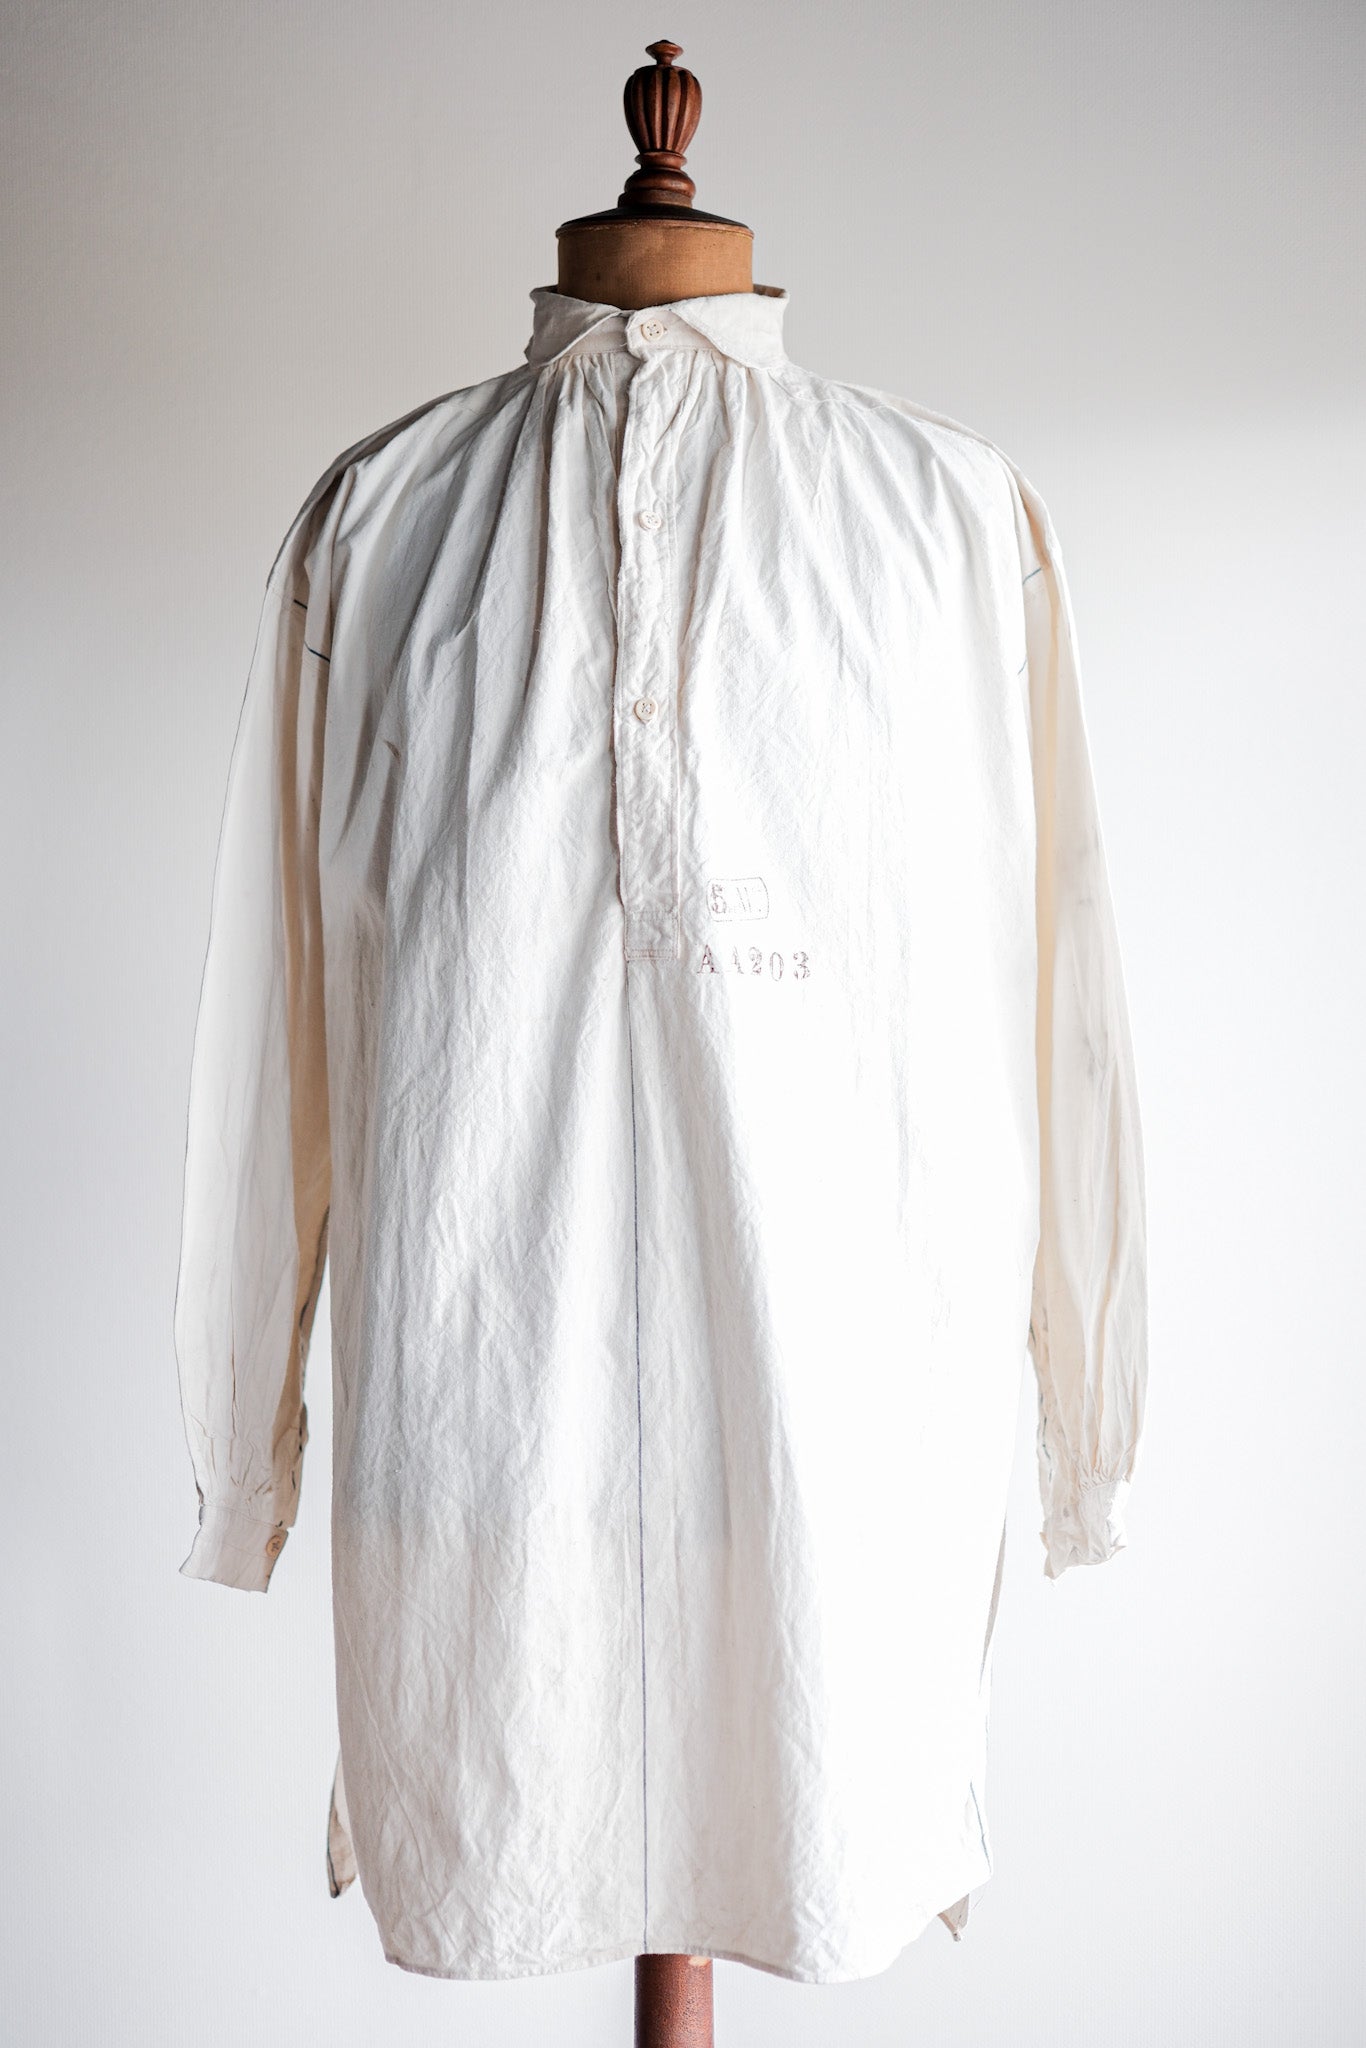 [Late 19th C] French Army of Africa Cotton Linen Coronial Shirt "Dead Stock"